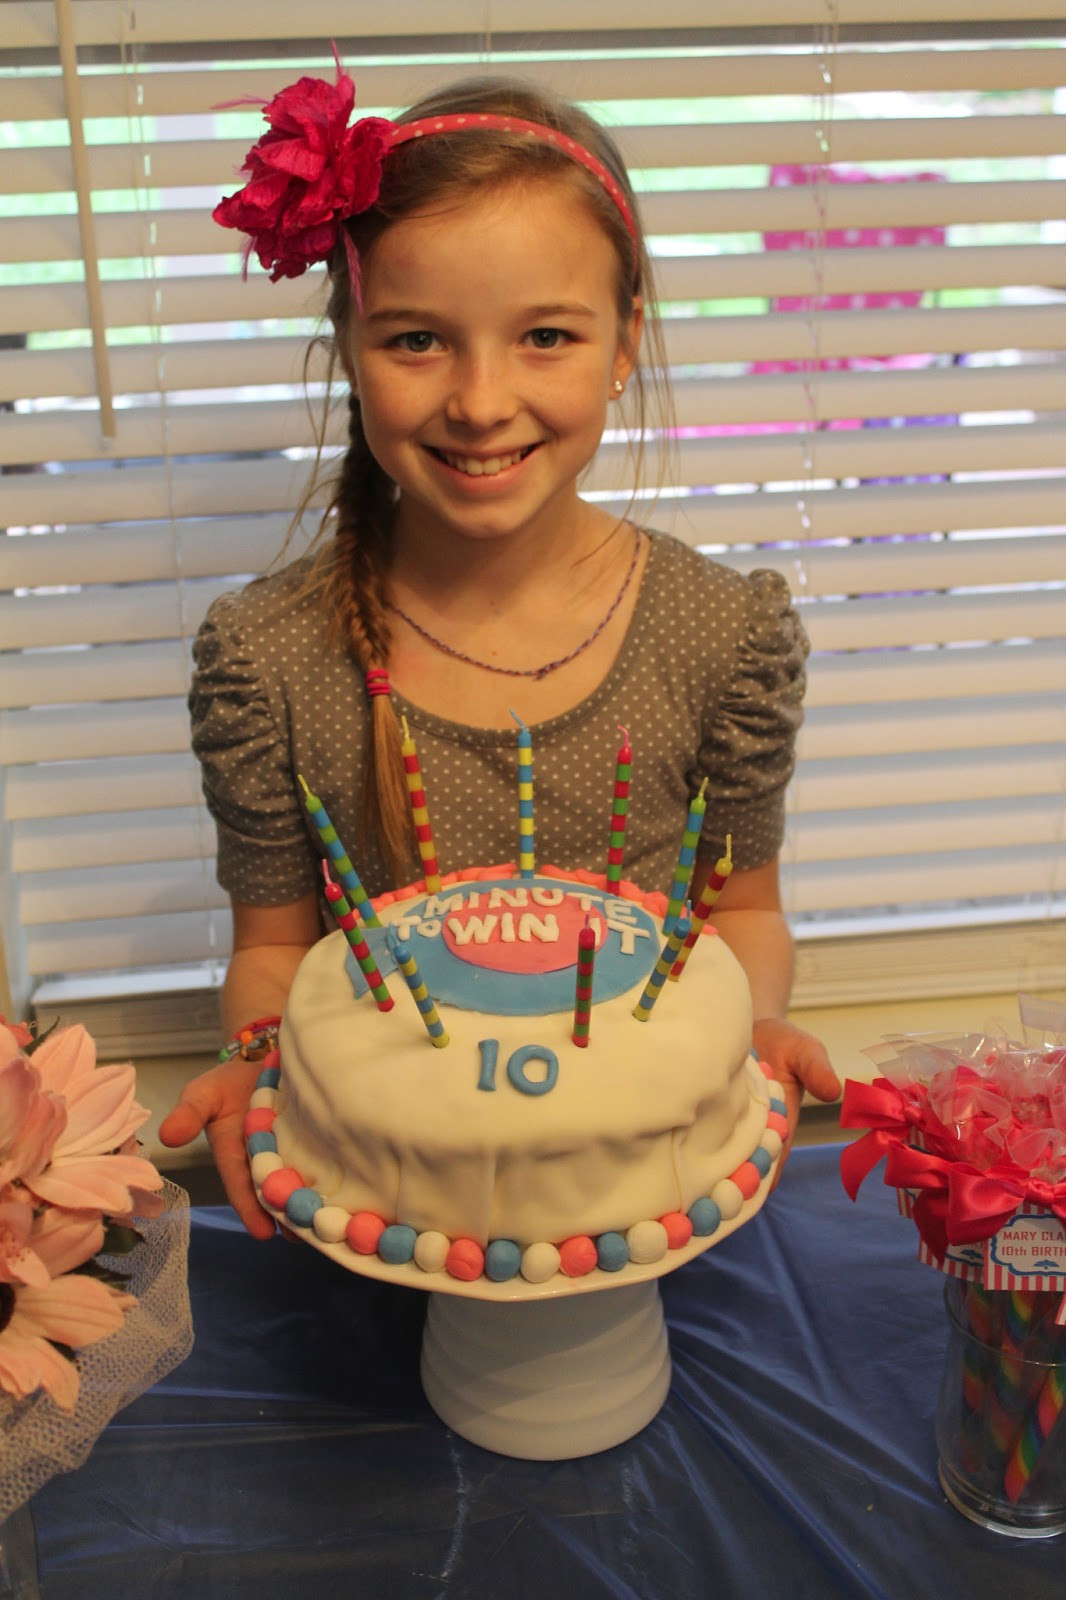 10 Year Old Pool Party Ideas
 Blair s Blessings 10 Year Old Minute to Win It Birthday Party